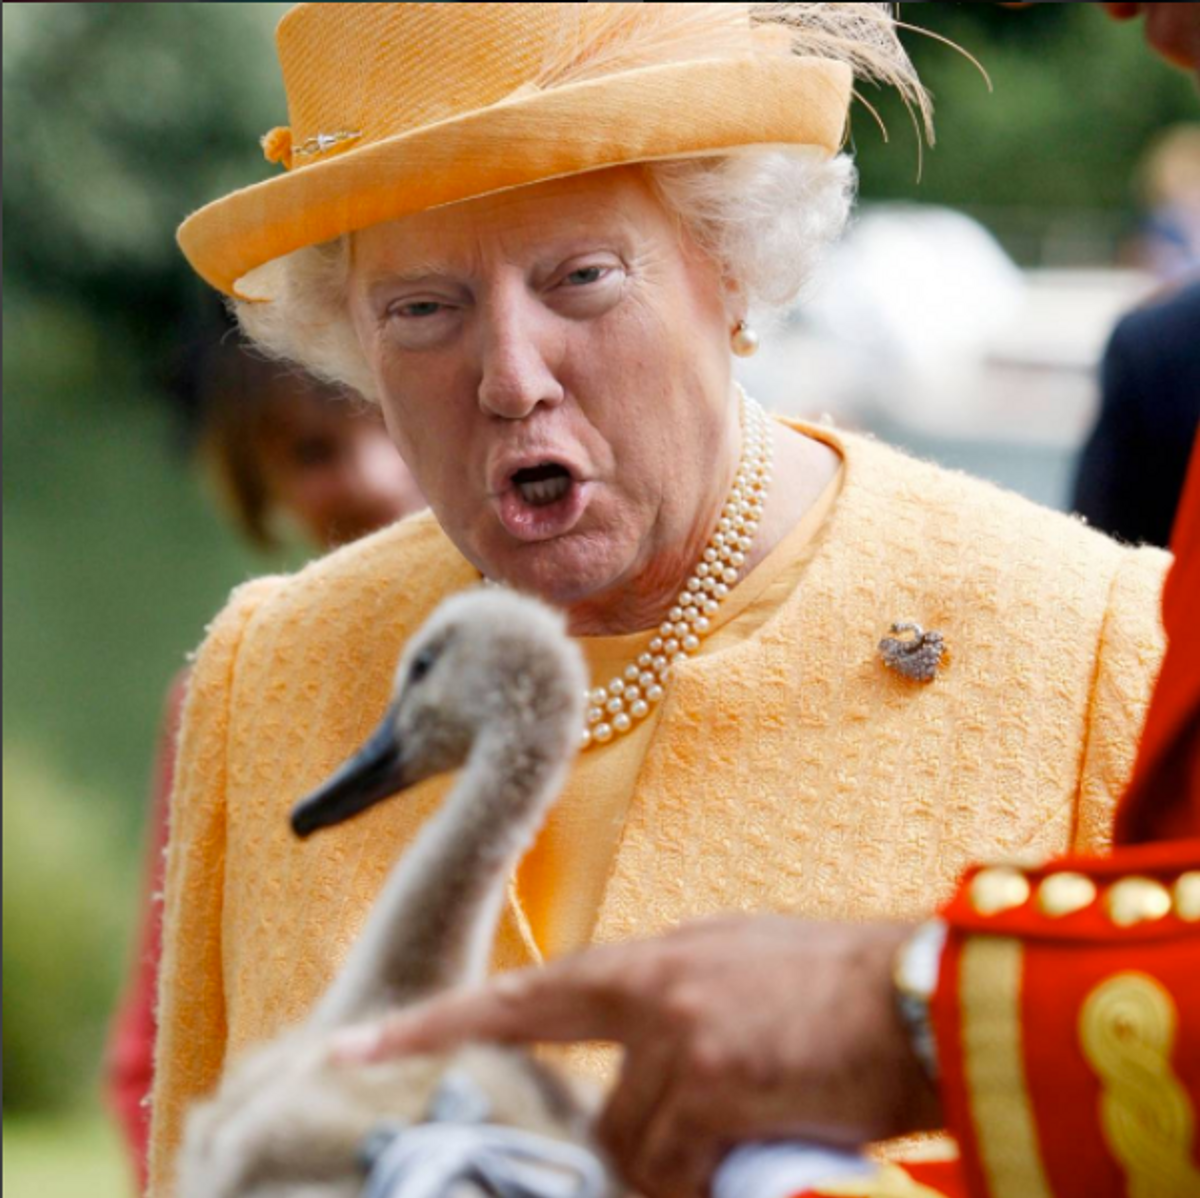 Someone's Been Photoshopping Trump's Face on the Queen